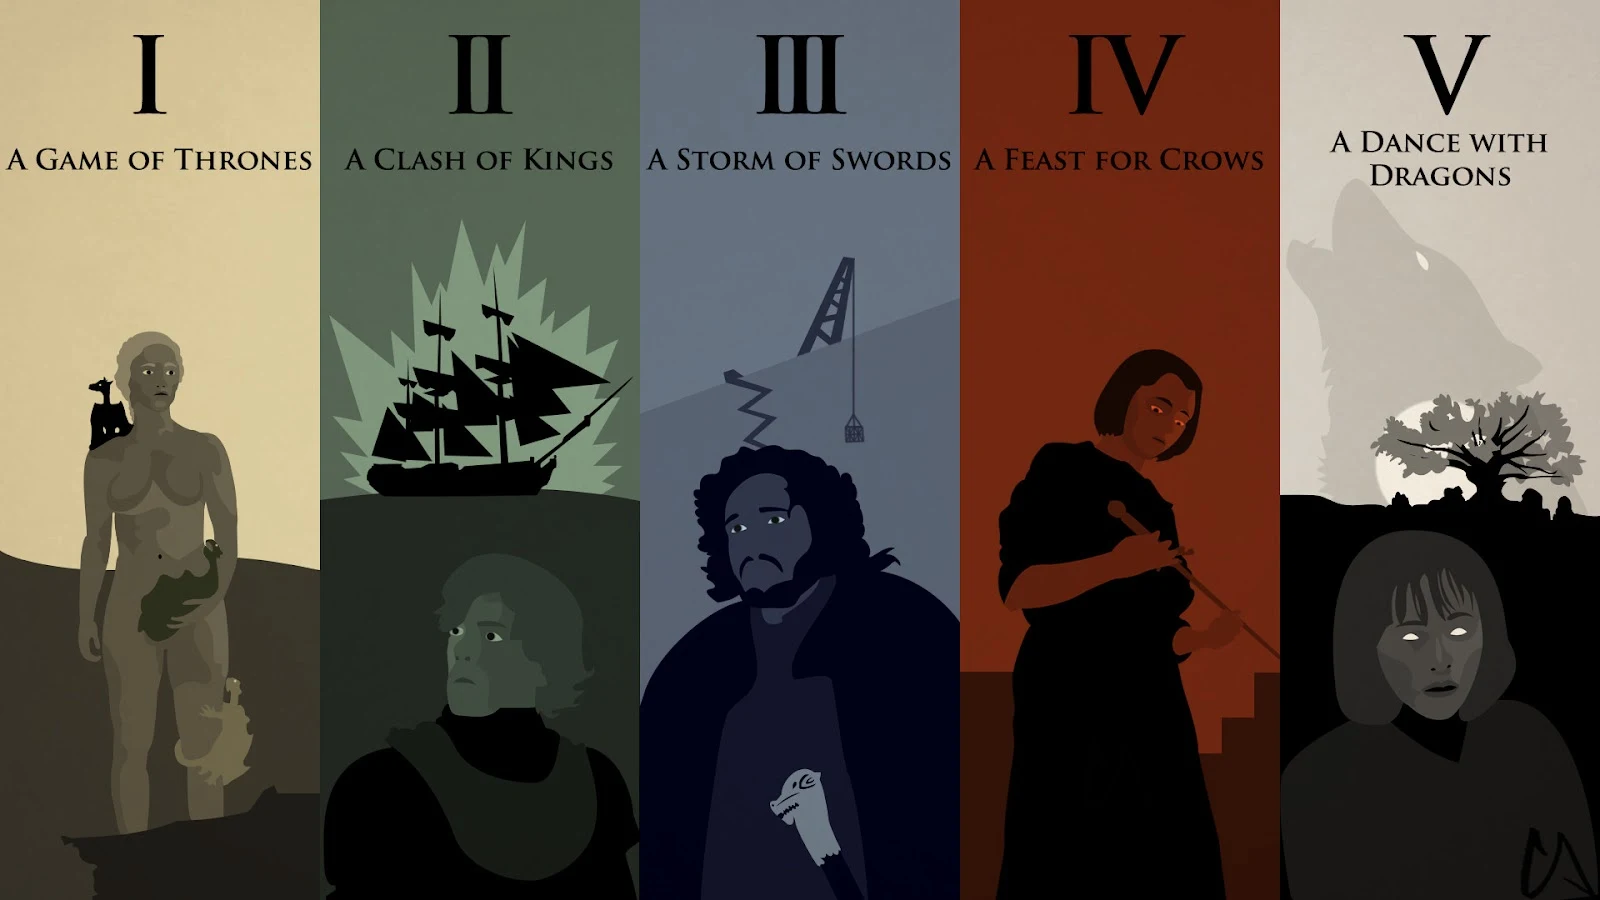 Portraits of key characters from ASOIAF, each bearing expressions that reflect their complex personalities